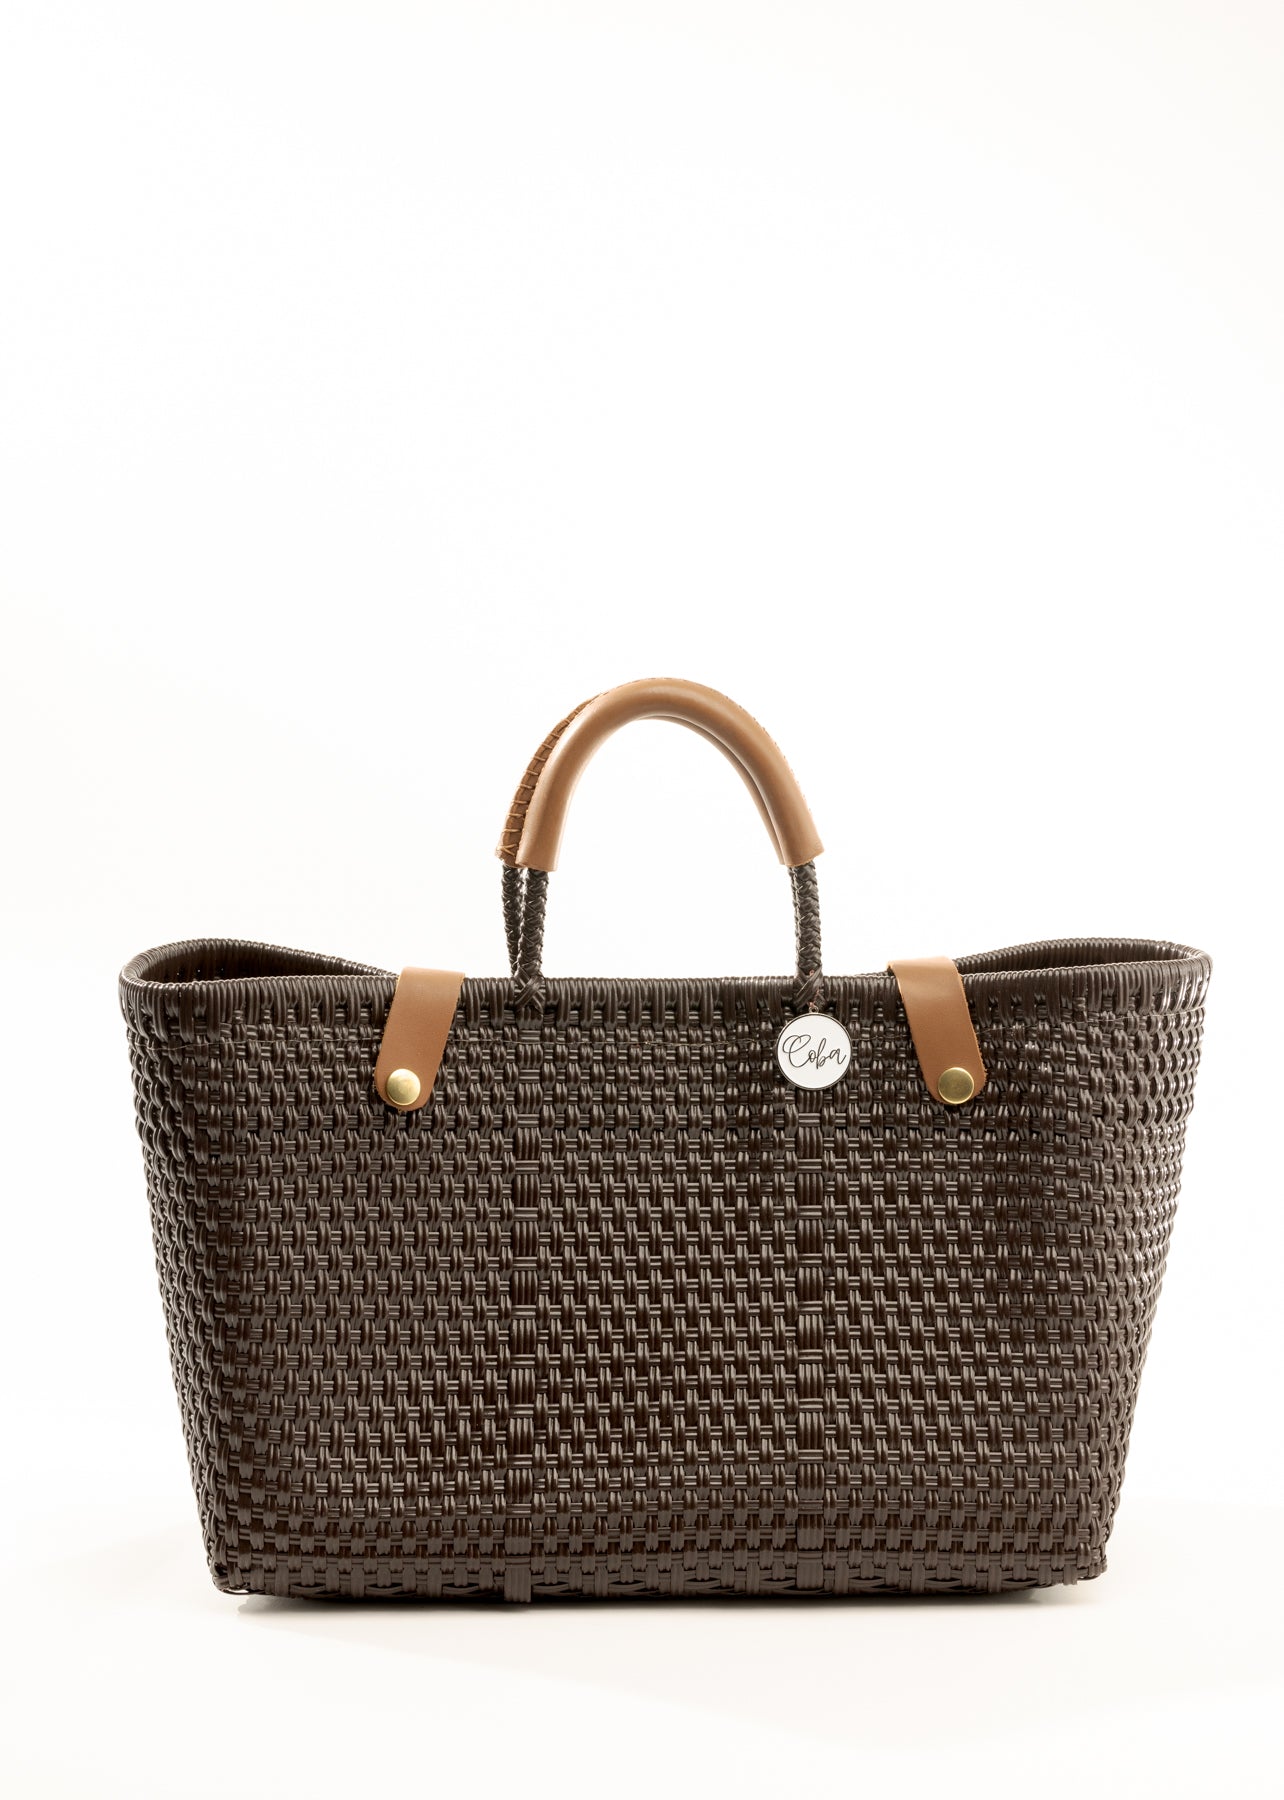 Brown woven recycled bucket handbag with brown leather handles and closure straps and a silver COBA logo medallion